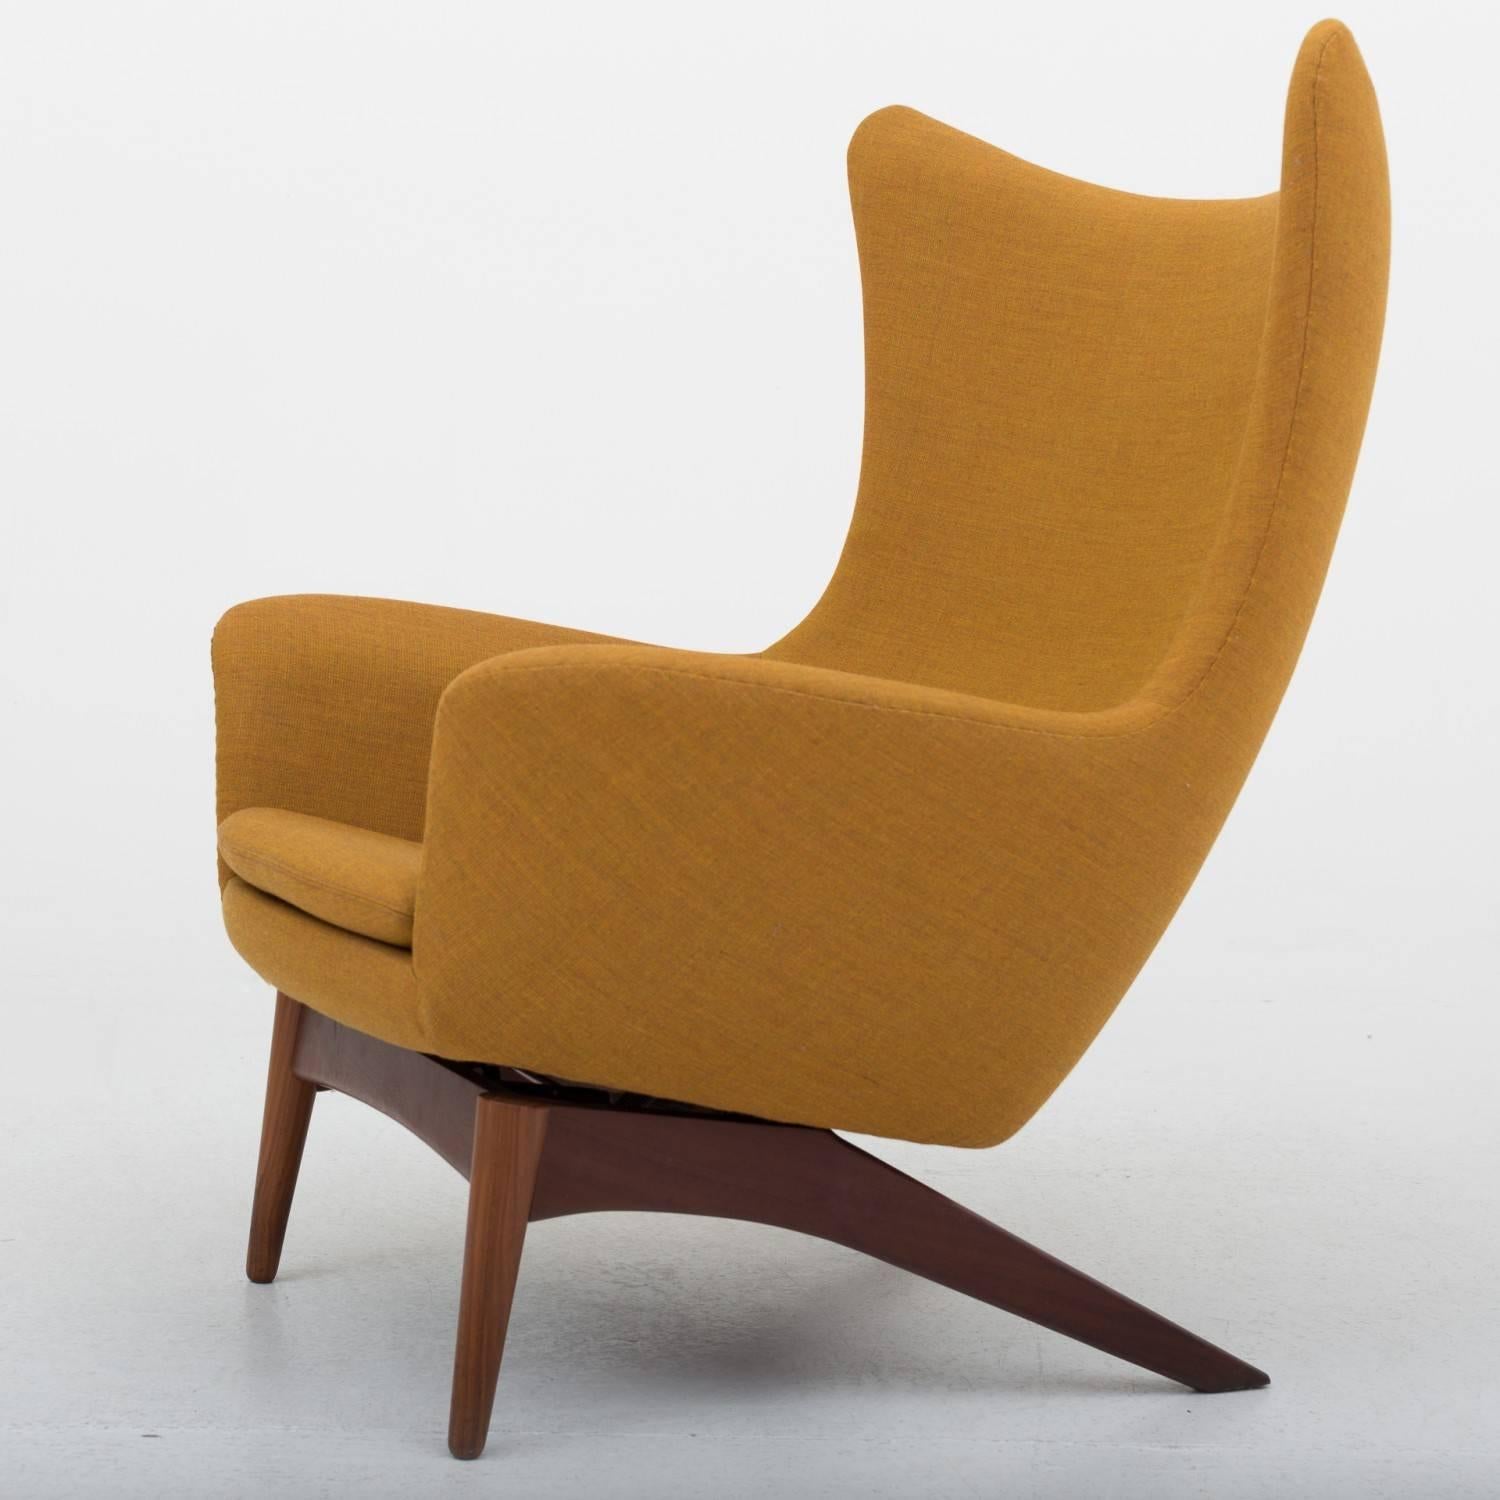 Easy chair and stool in teak. Reupholstered in wool (Canvas 424) model 207. Chair with tilt function. Designed by H.W. Klein and maker Bramin.